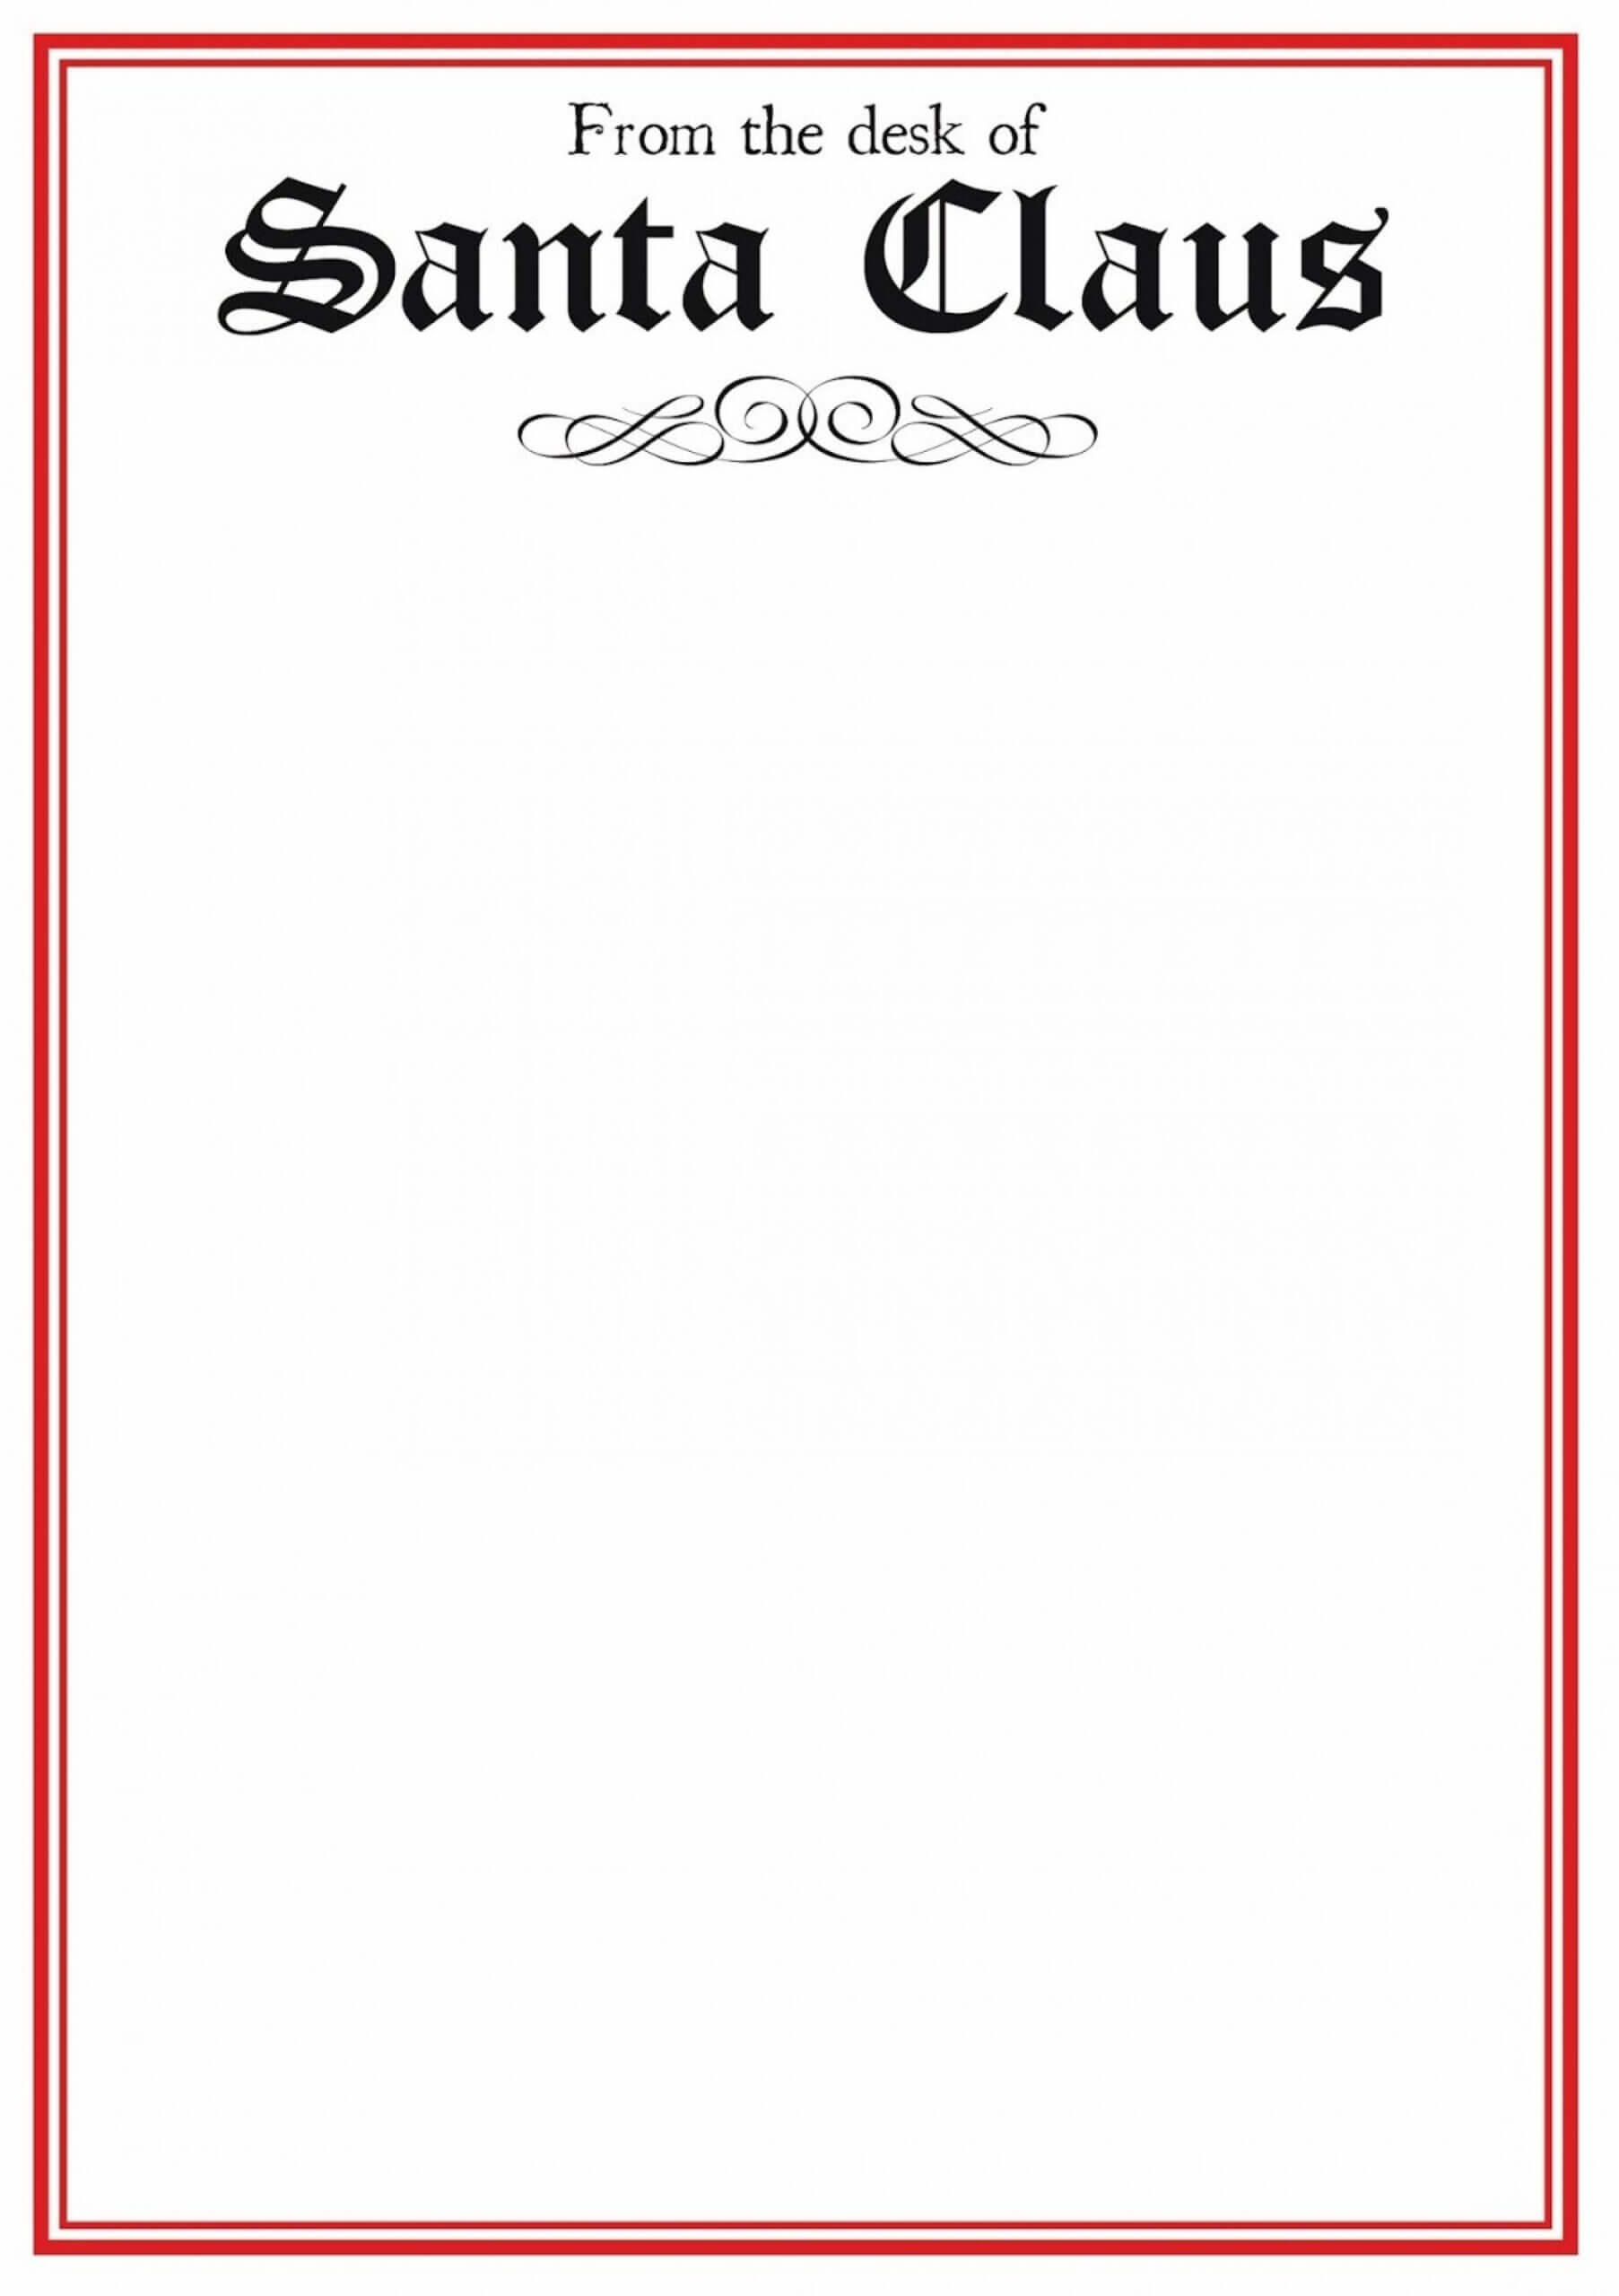 011 Free Letterom Santa Template Microsoft Word Ideas Claus Throughout Santa Letter Template Word